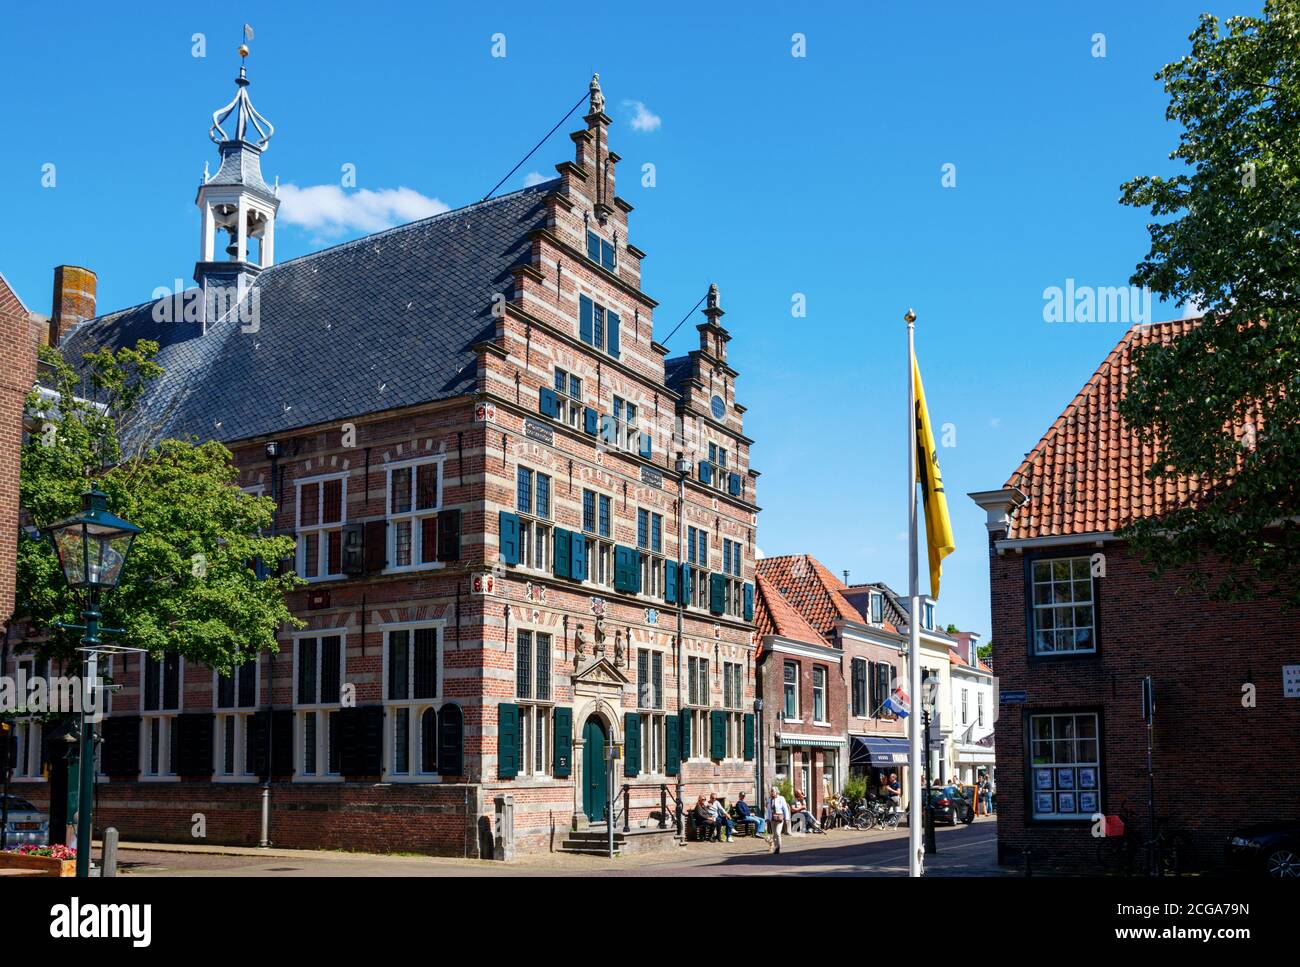 Marktstraat, Naarden historic town centre. Medieval Town hall and sightseeing tourists at the Marktstraat on a sunny day. The Netherlands. Stock Photo